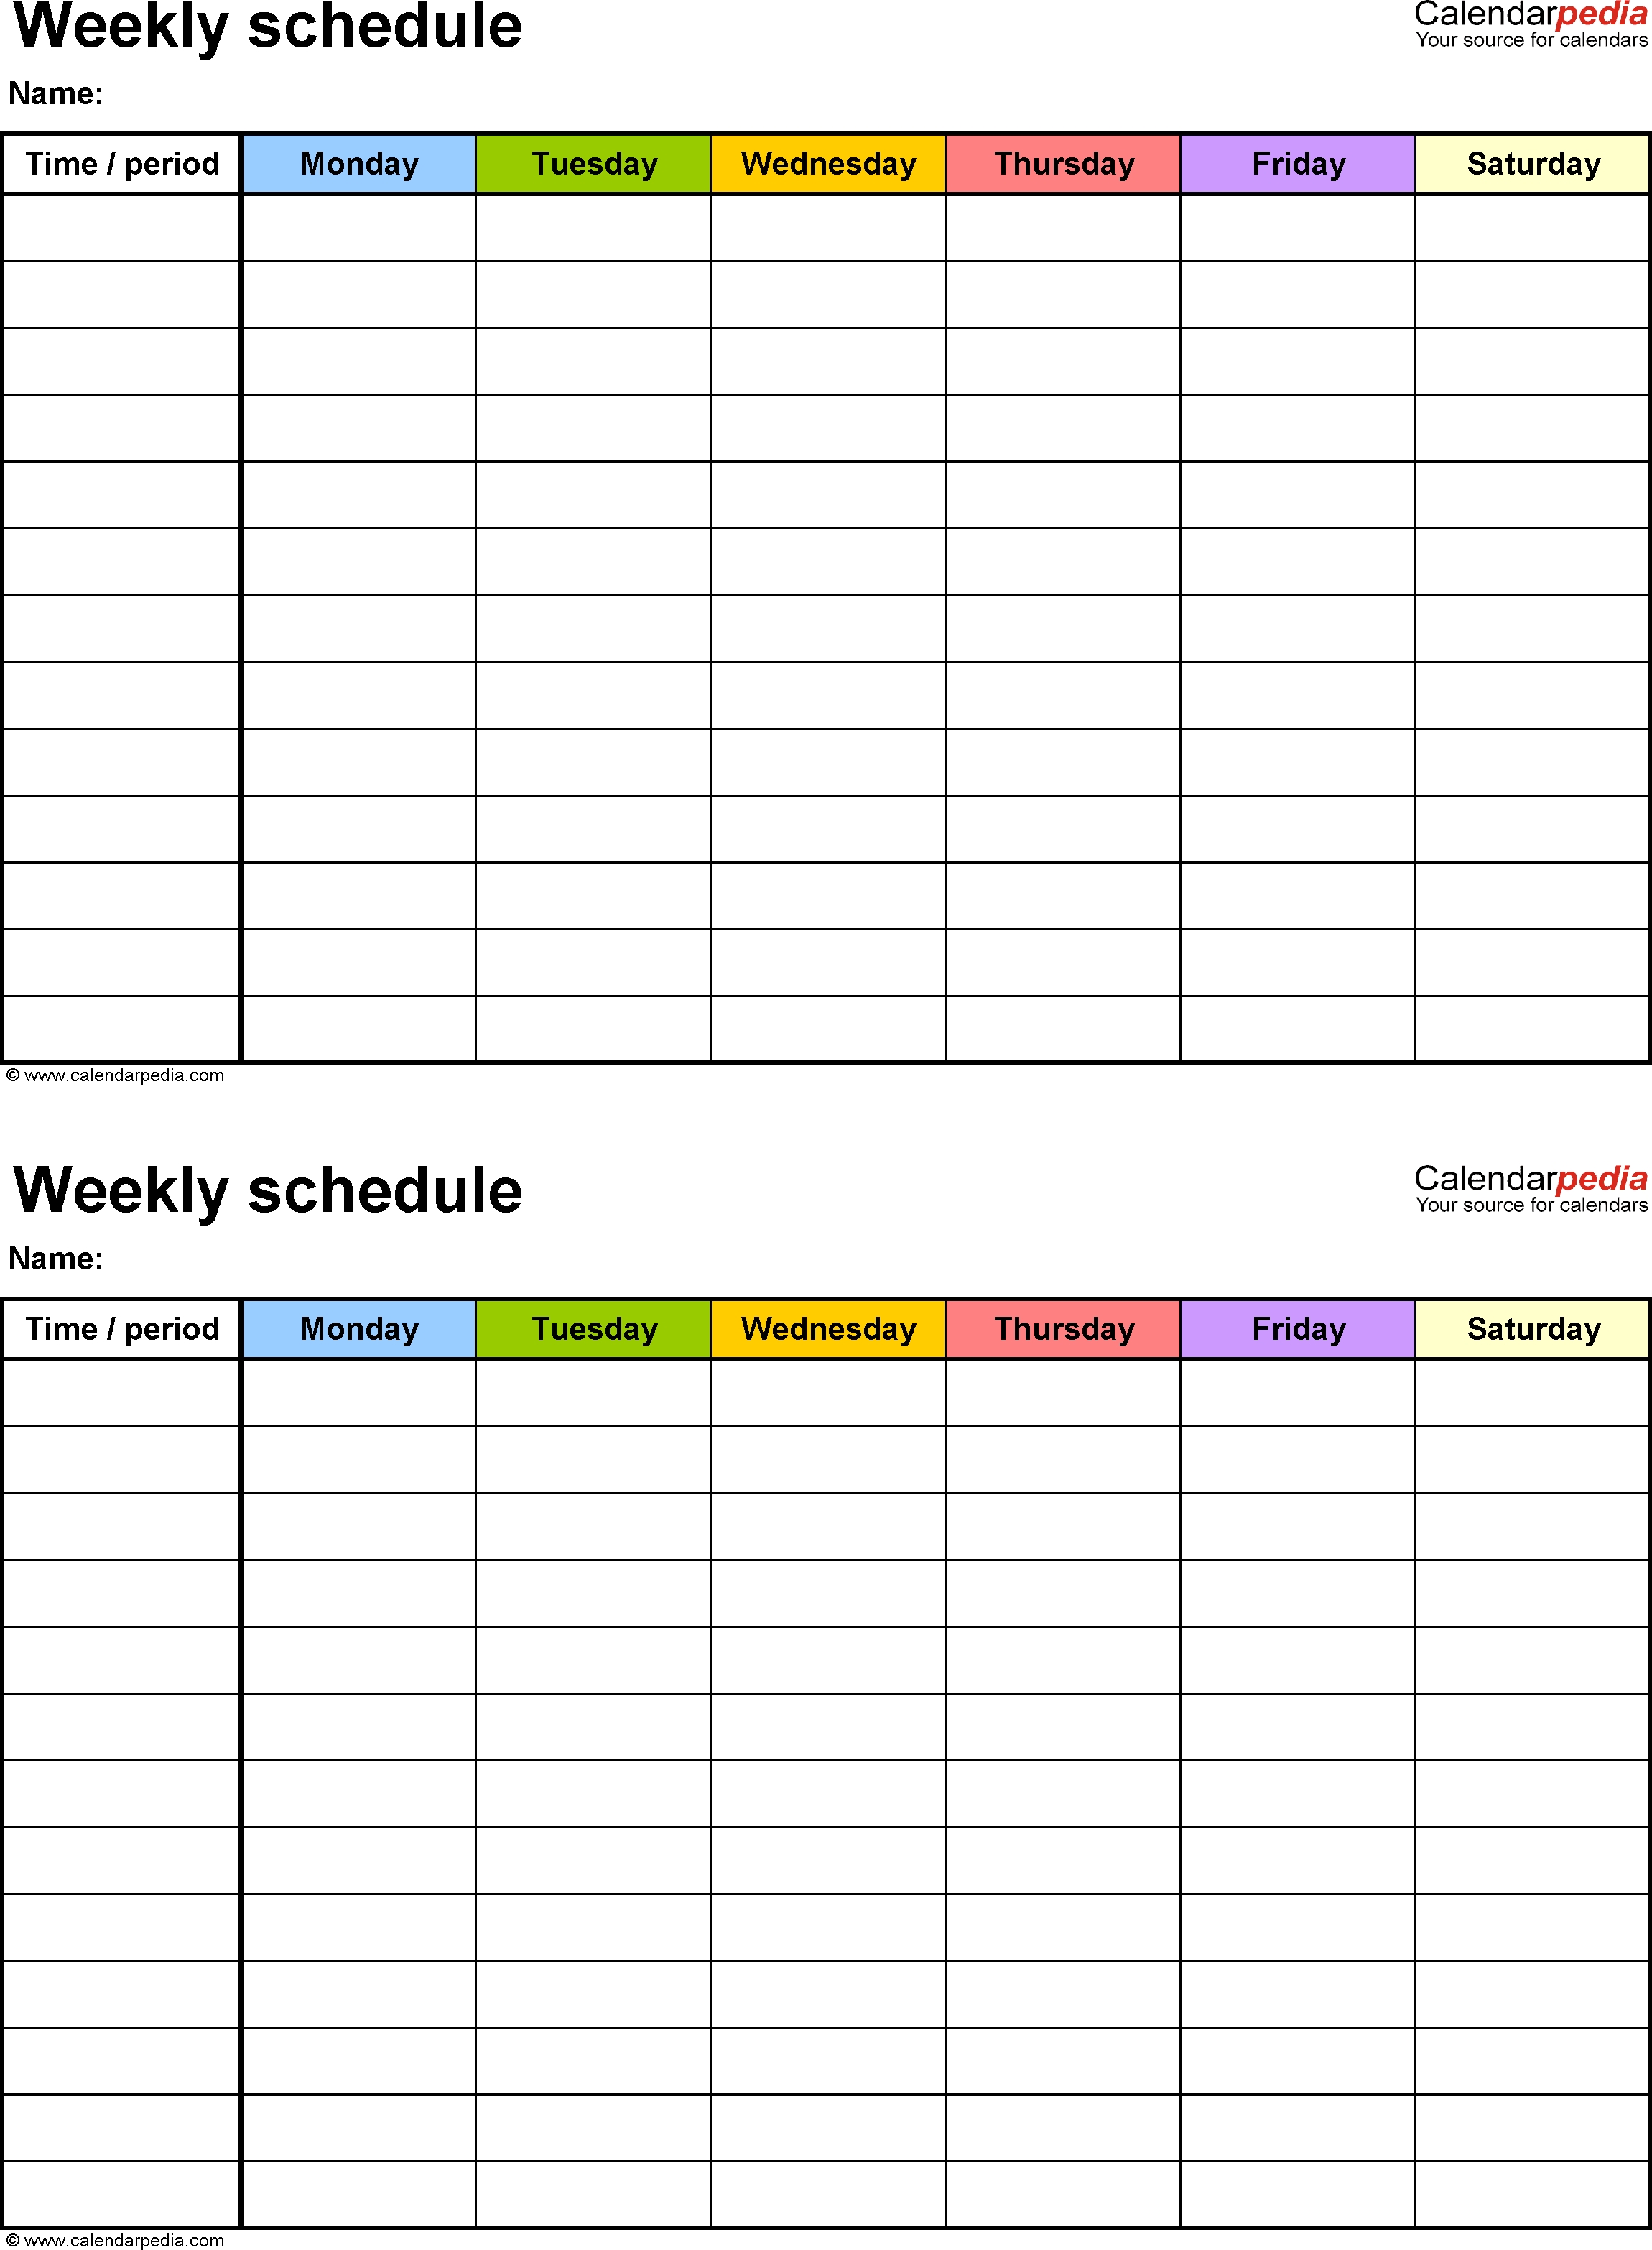 Free Weekly Schedule Templates For Word - 18 Templates-Monday To Sunday Weekly Planner Template Word